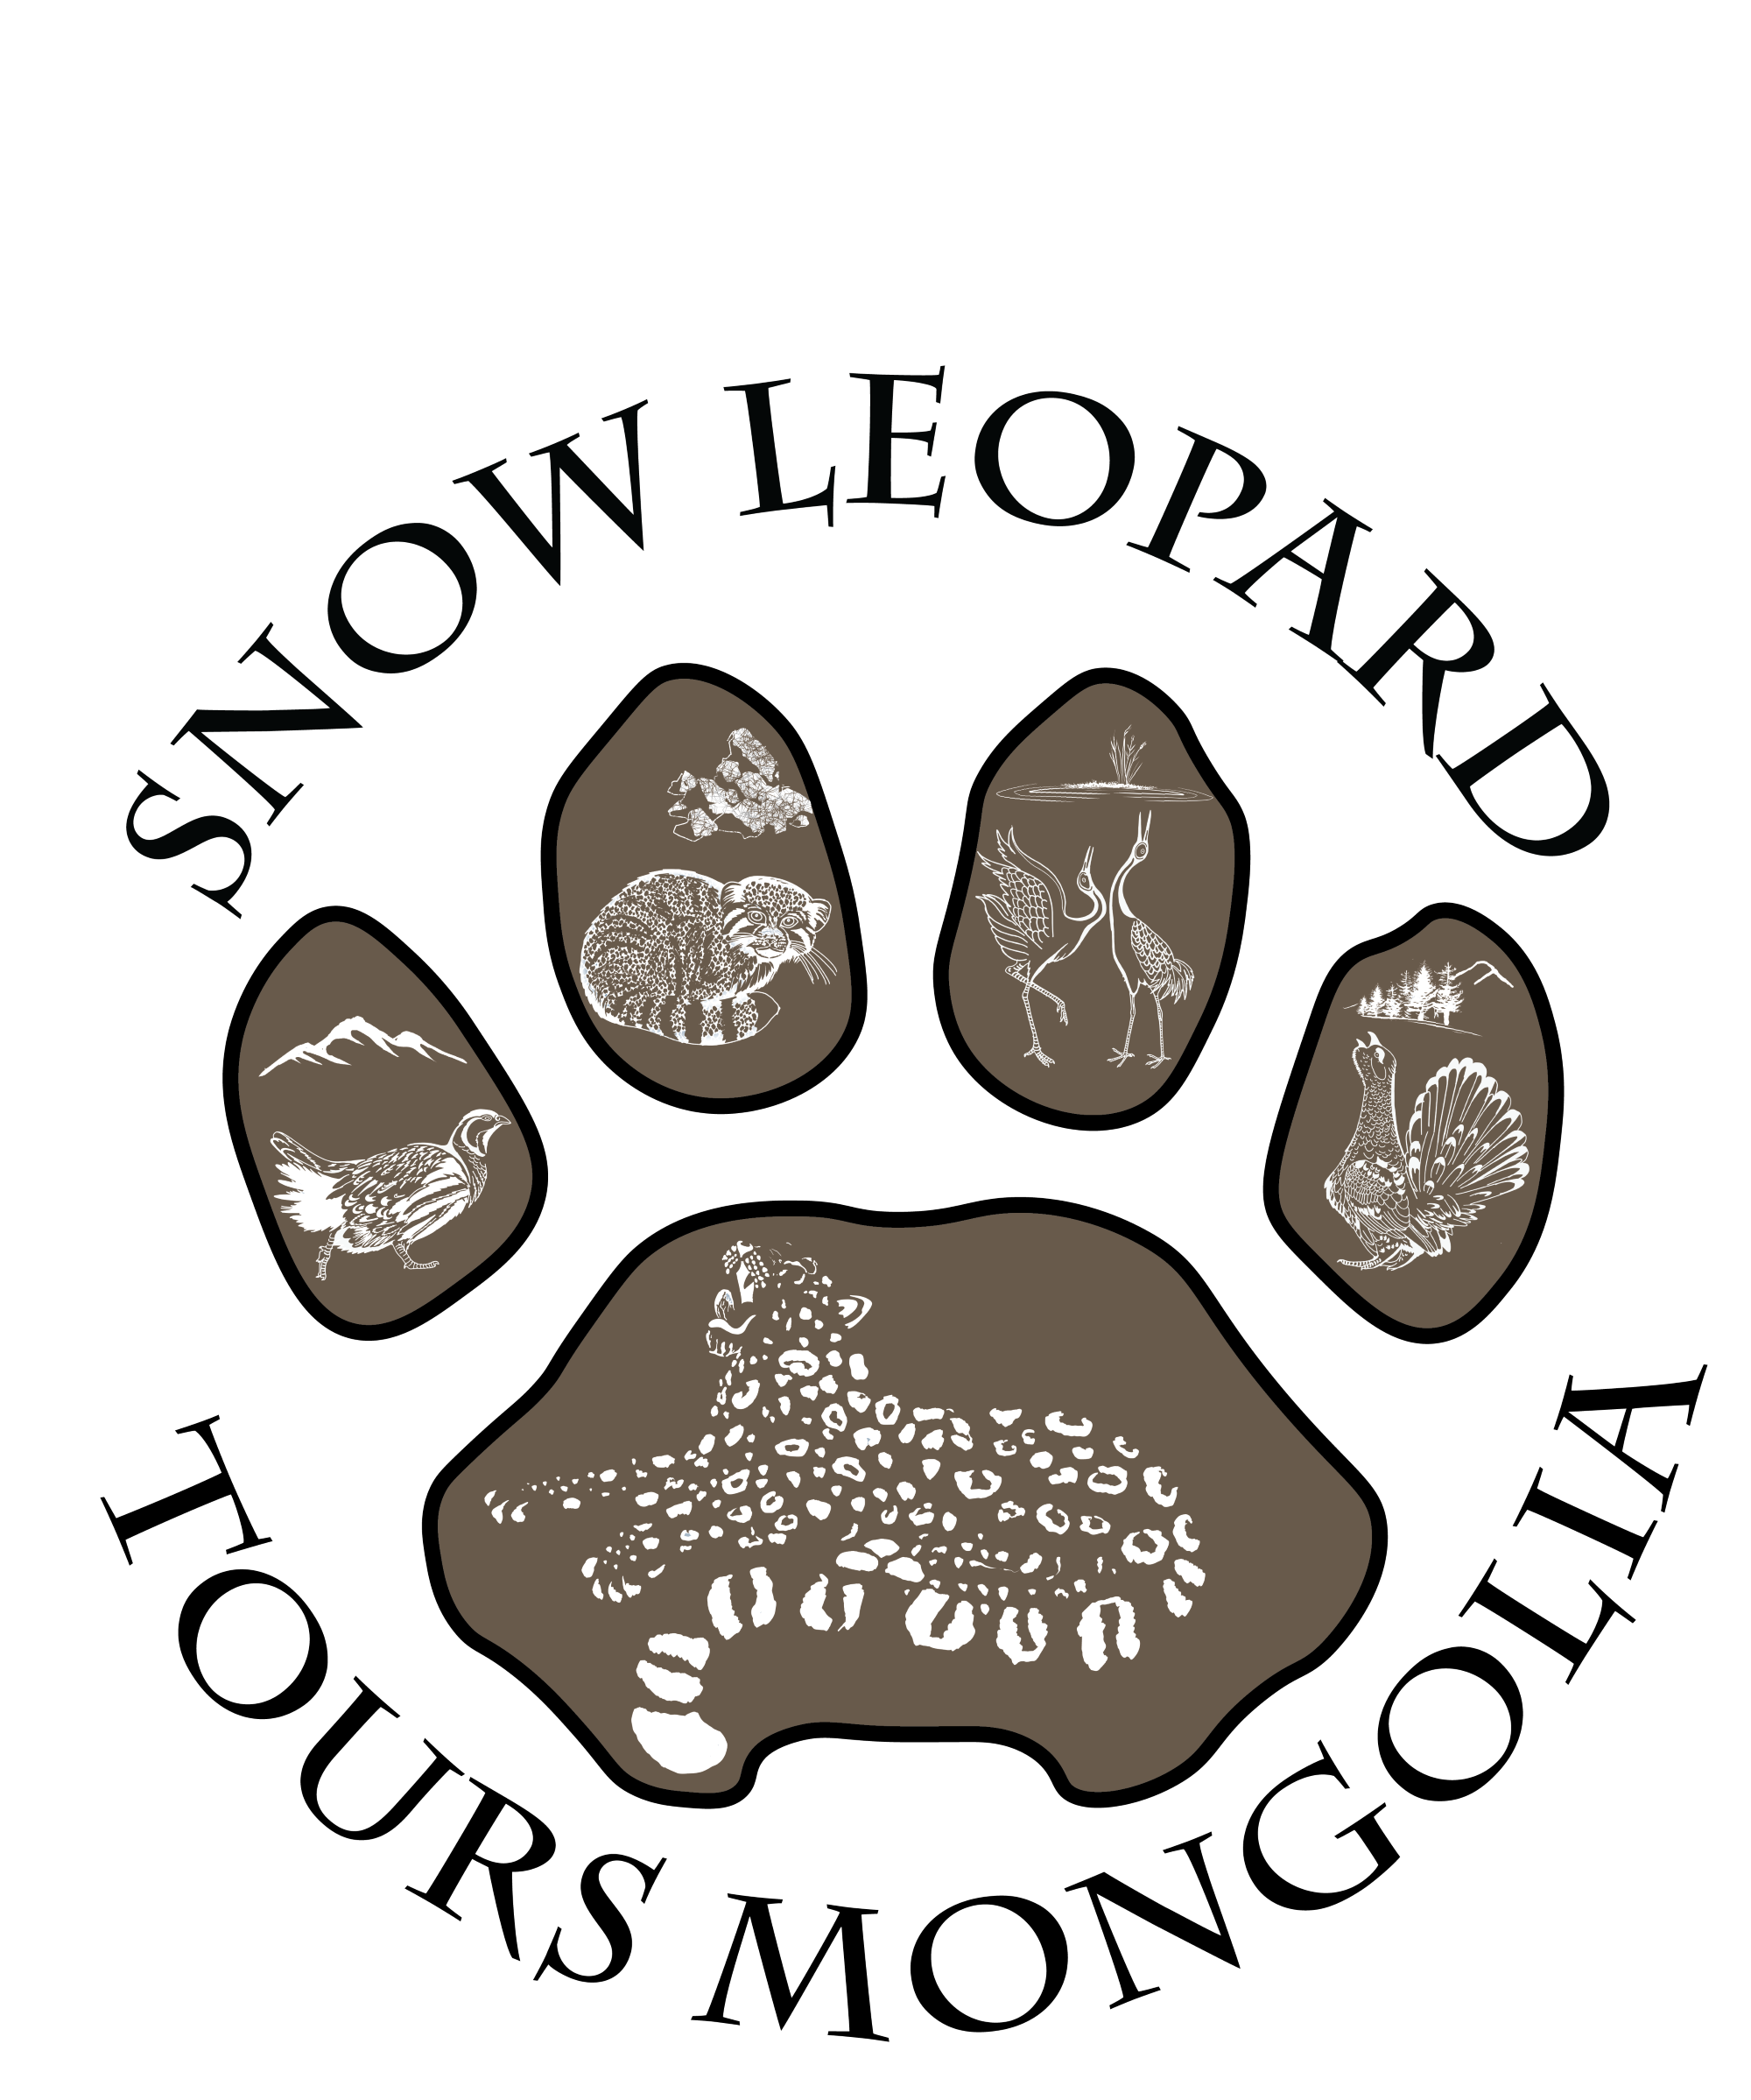 Snow Leopard Tours Mongolia | Snow Leopard and bird watching tours